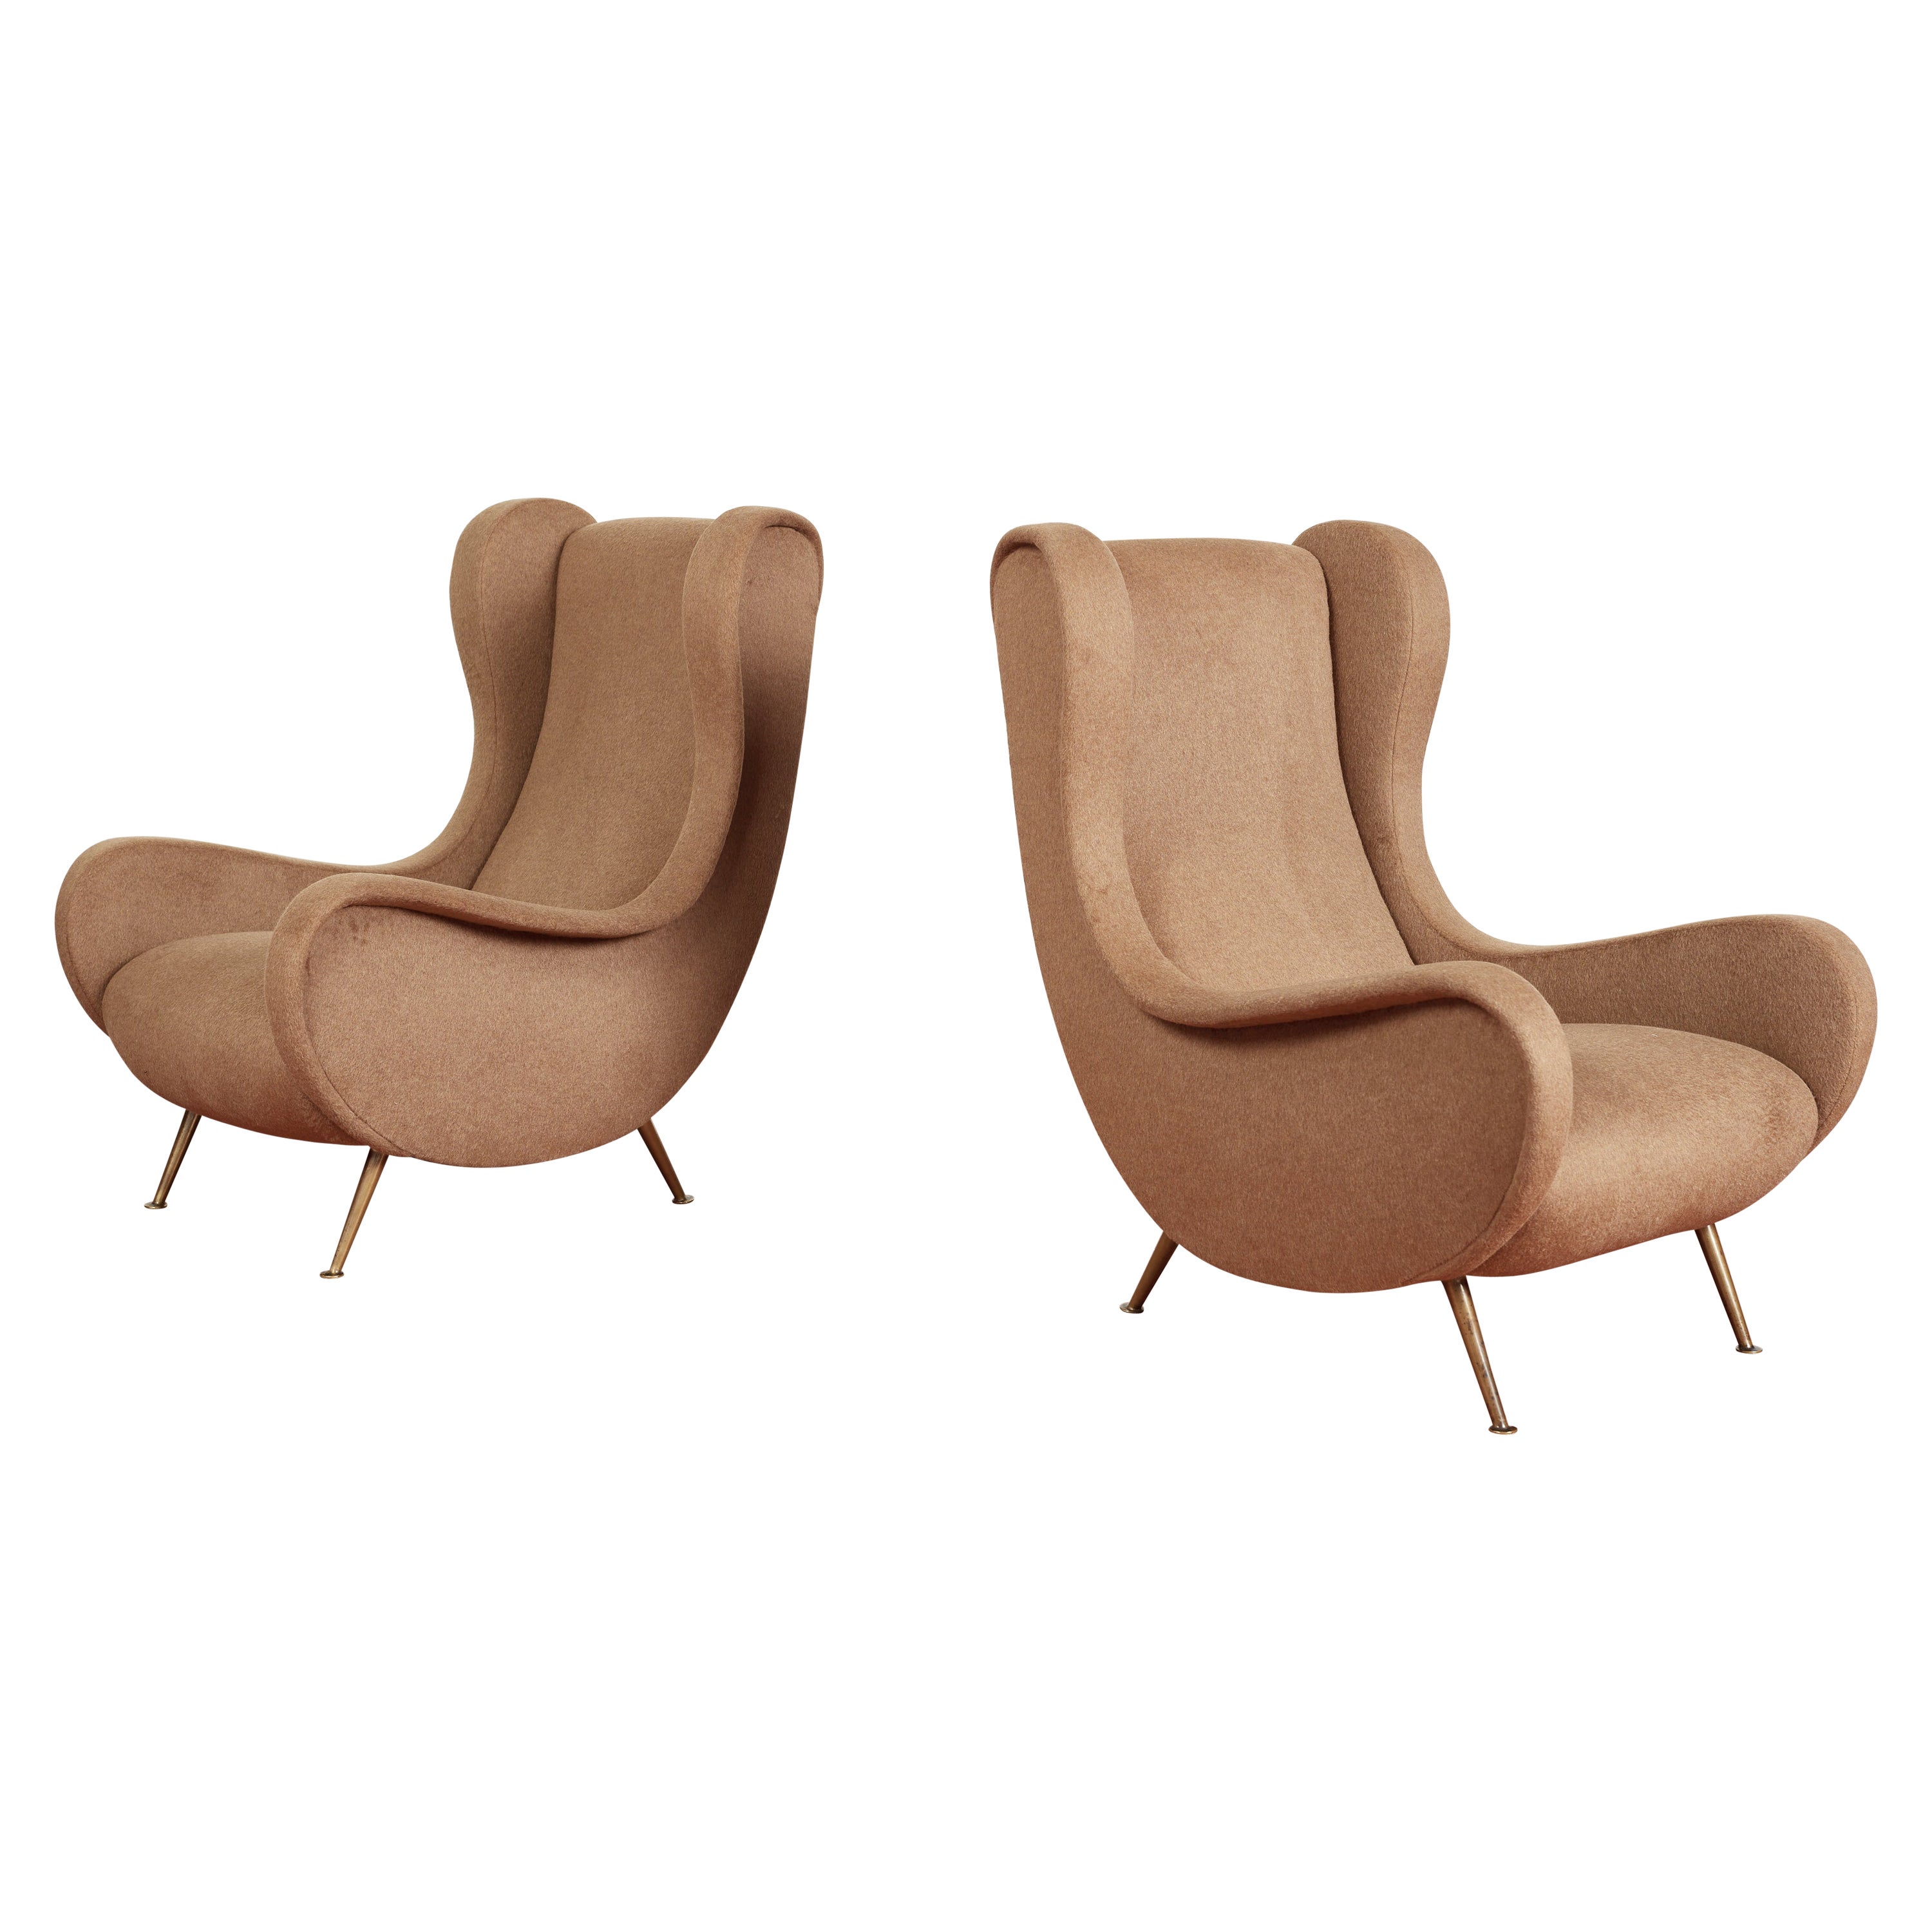 Marco Zanuso Attributed Chairs For Sale